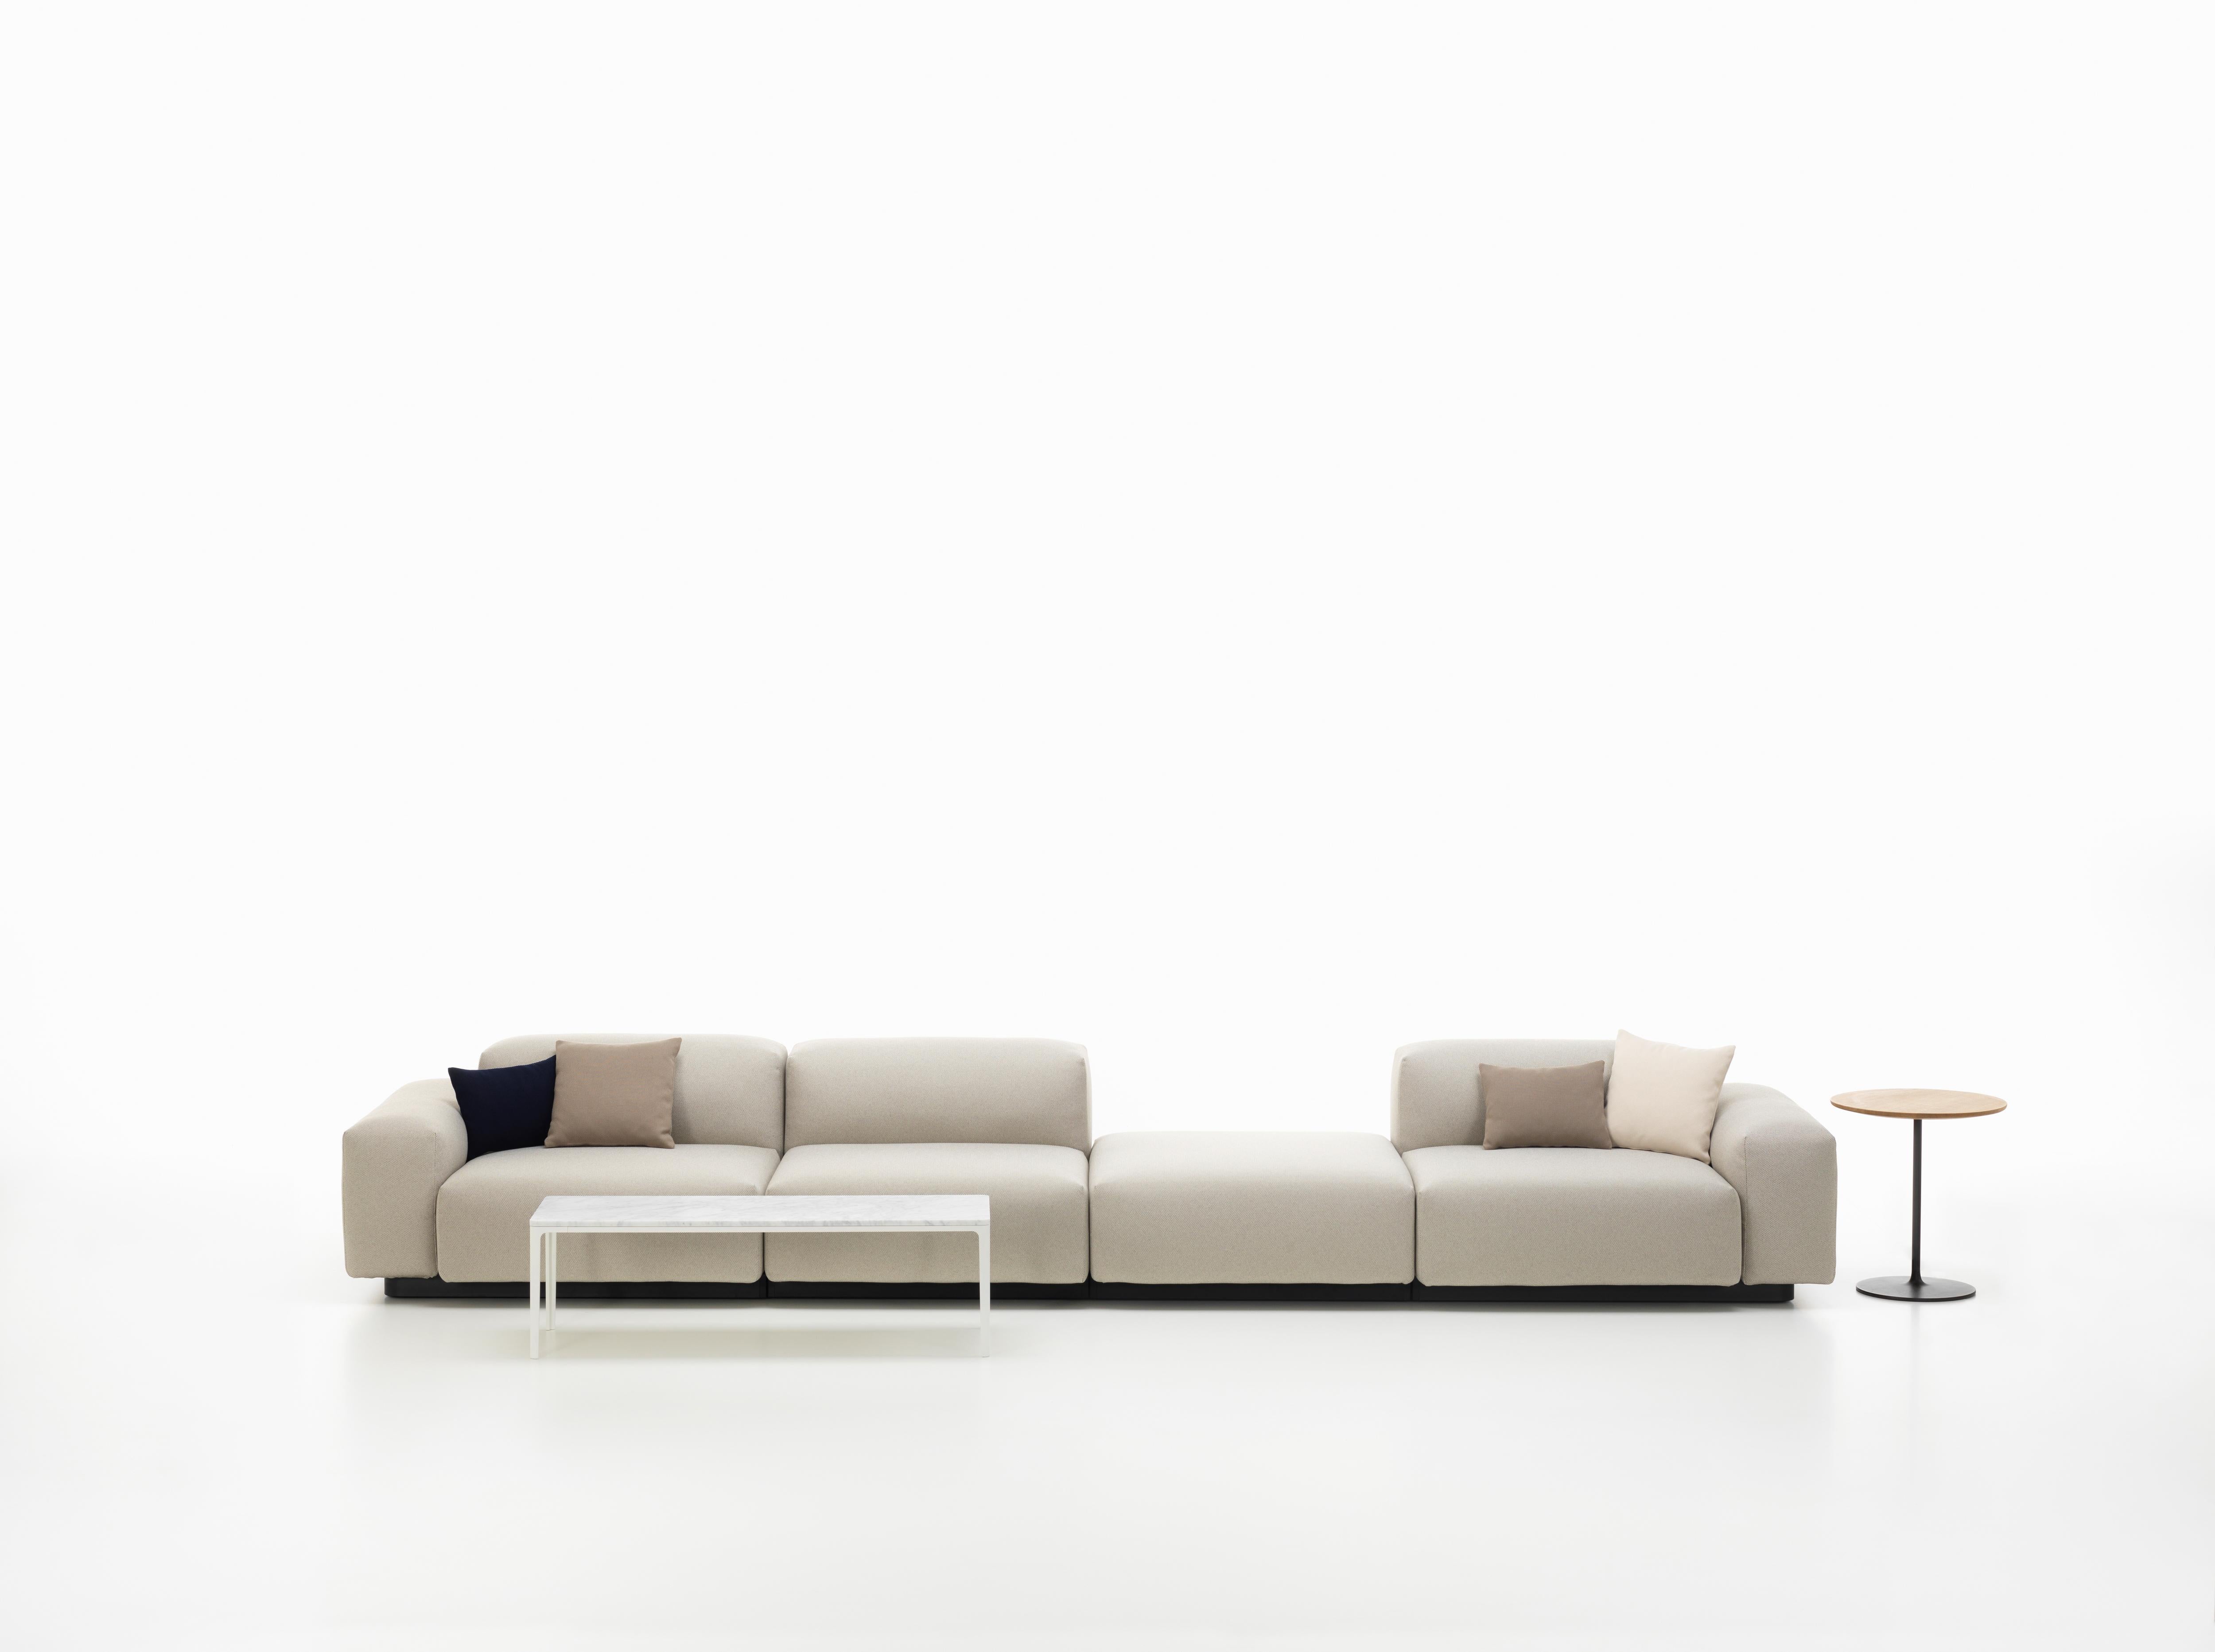 Vitra Soft Modular Four-Seat Sofa with Platform Middle in Pearl Olimpo (Moderne) im Angebot